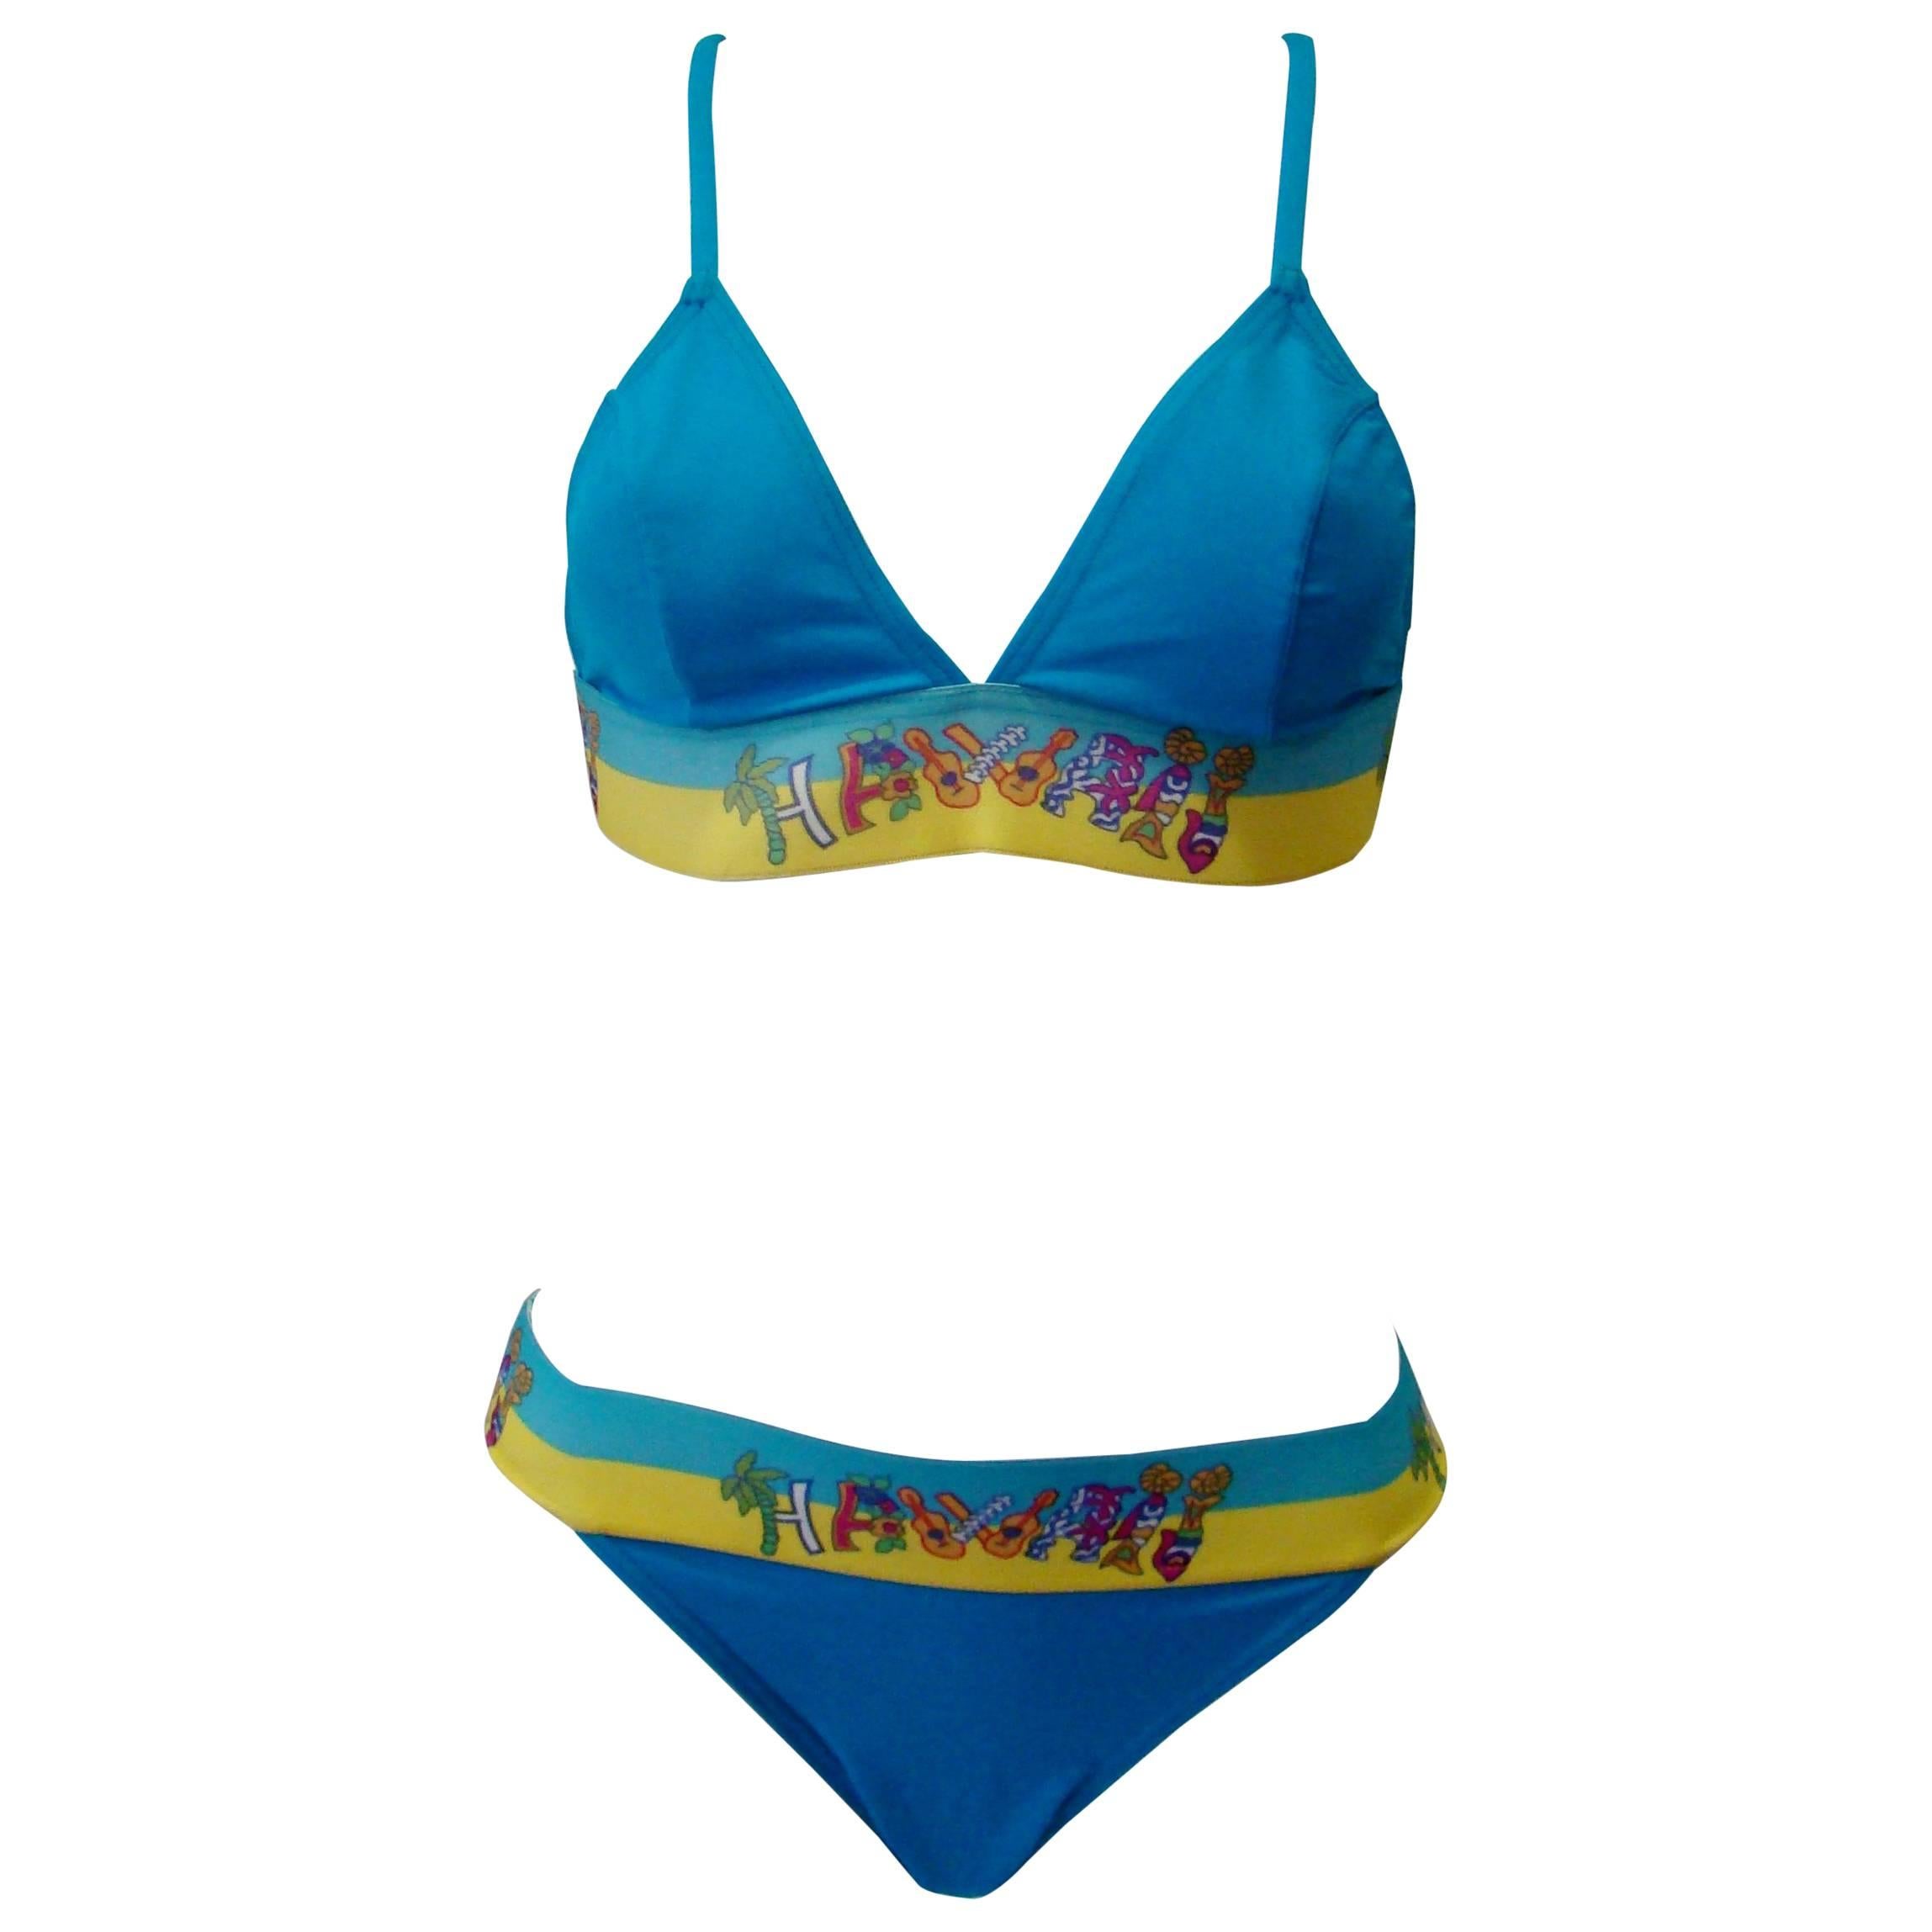 Istante By Gianni Versace Turquoise Bikini With Hawai Print Spring 1998 For Sale